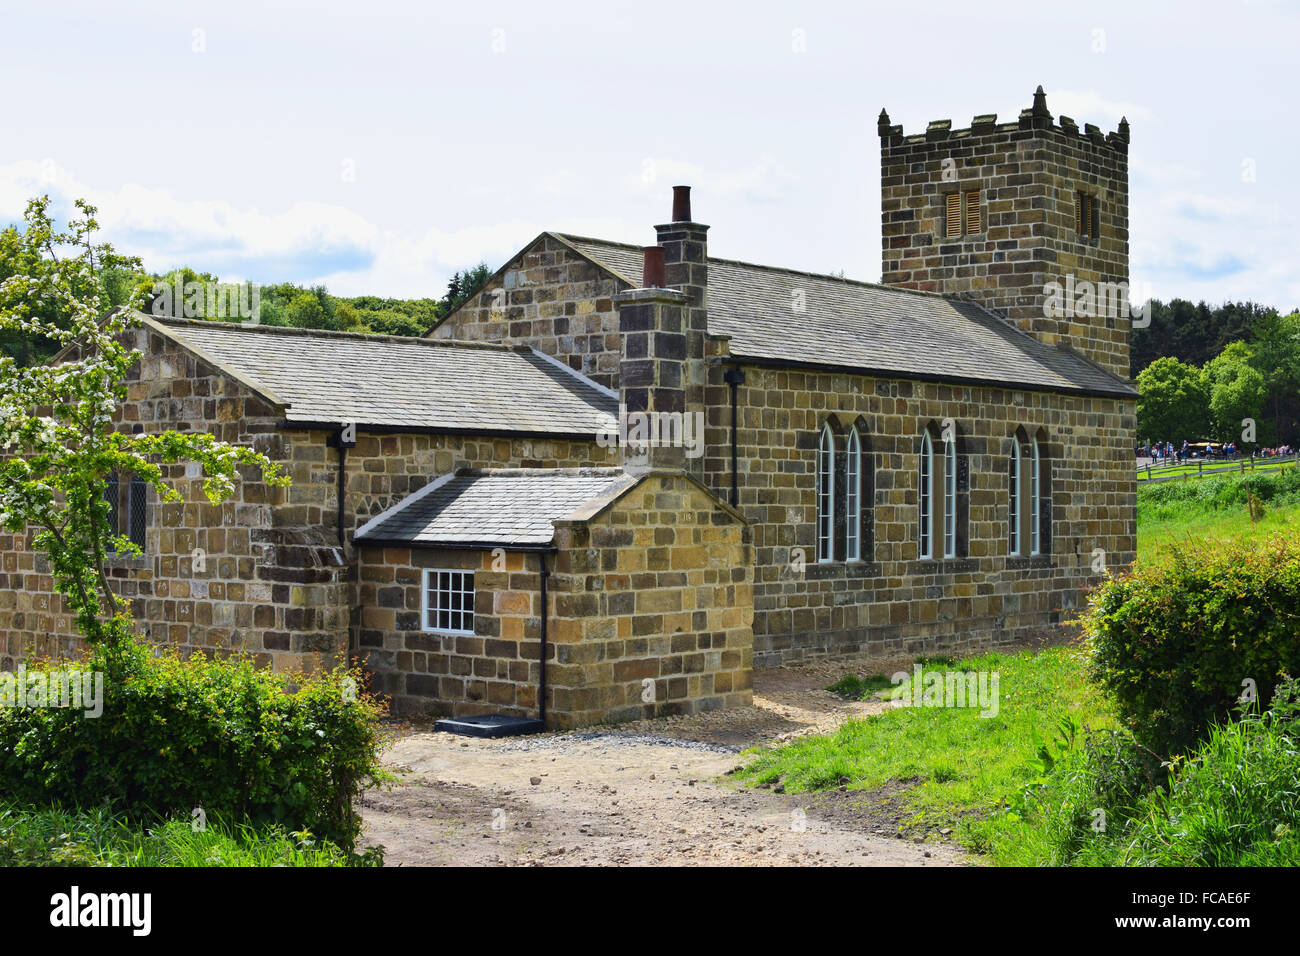 Construction now almost complete on the rebuilt St Helens Church, Eston. Now rebuilt at Beamish Museum. Stock Photo